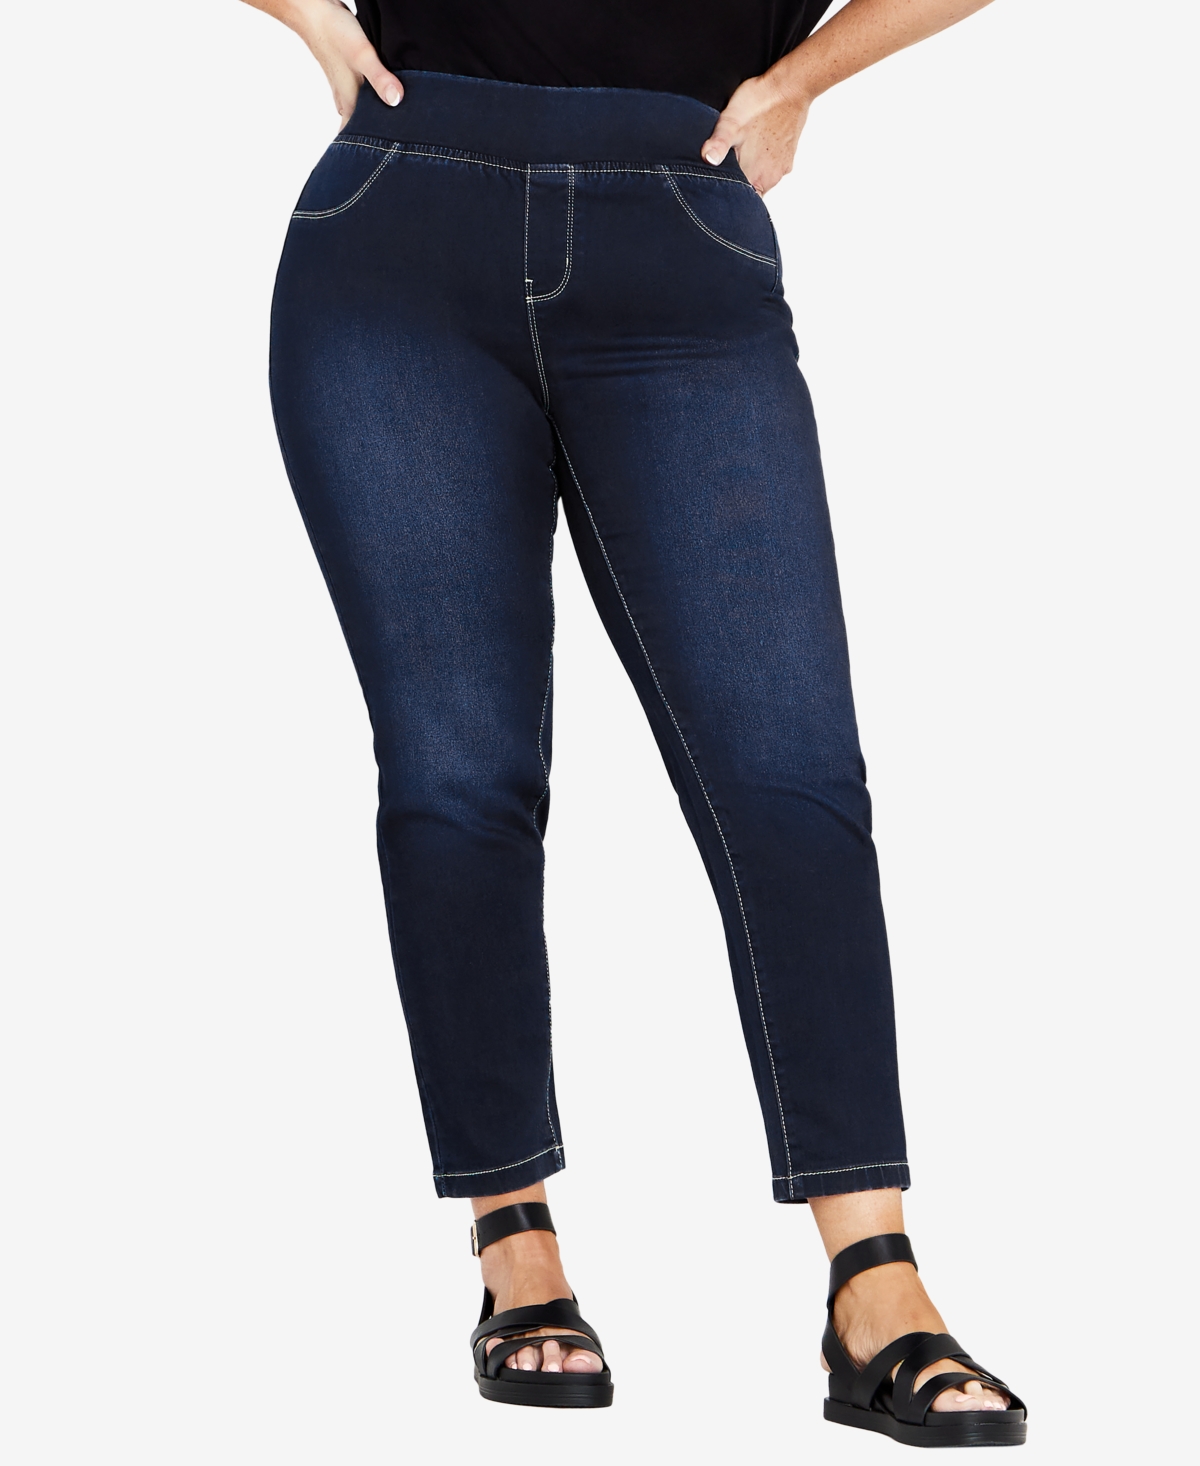 Plus Size Butter DenimÂ Average Length Pull On Jeans - Mid Wash